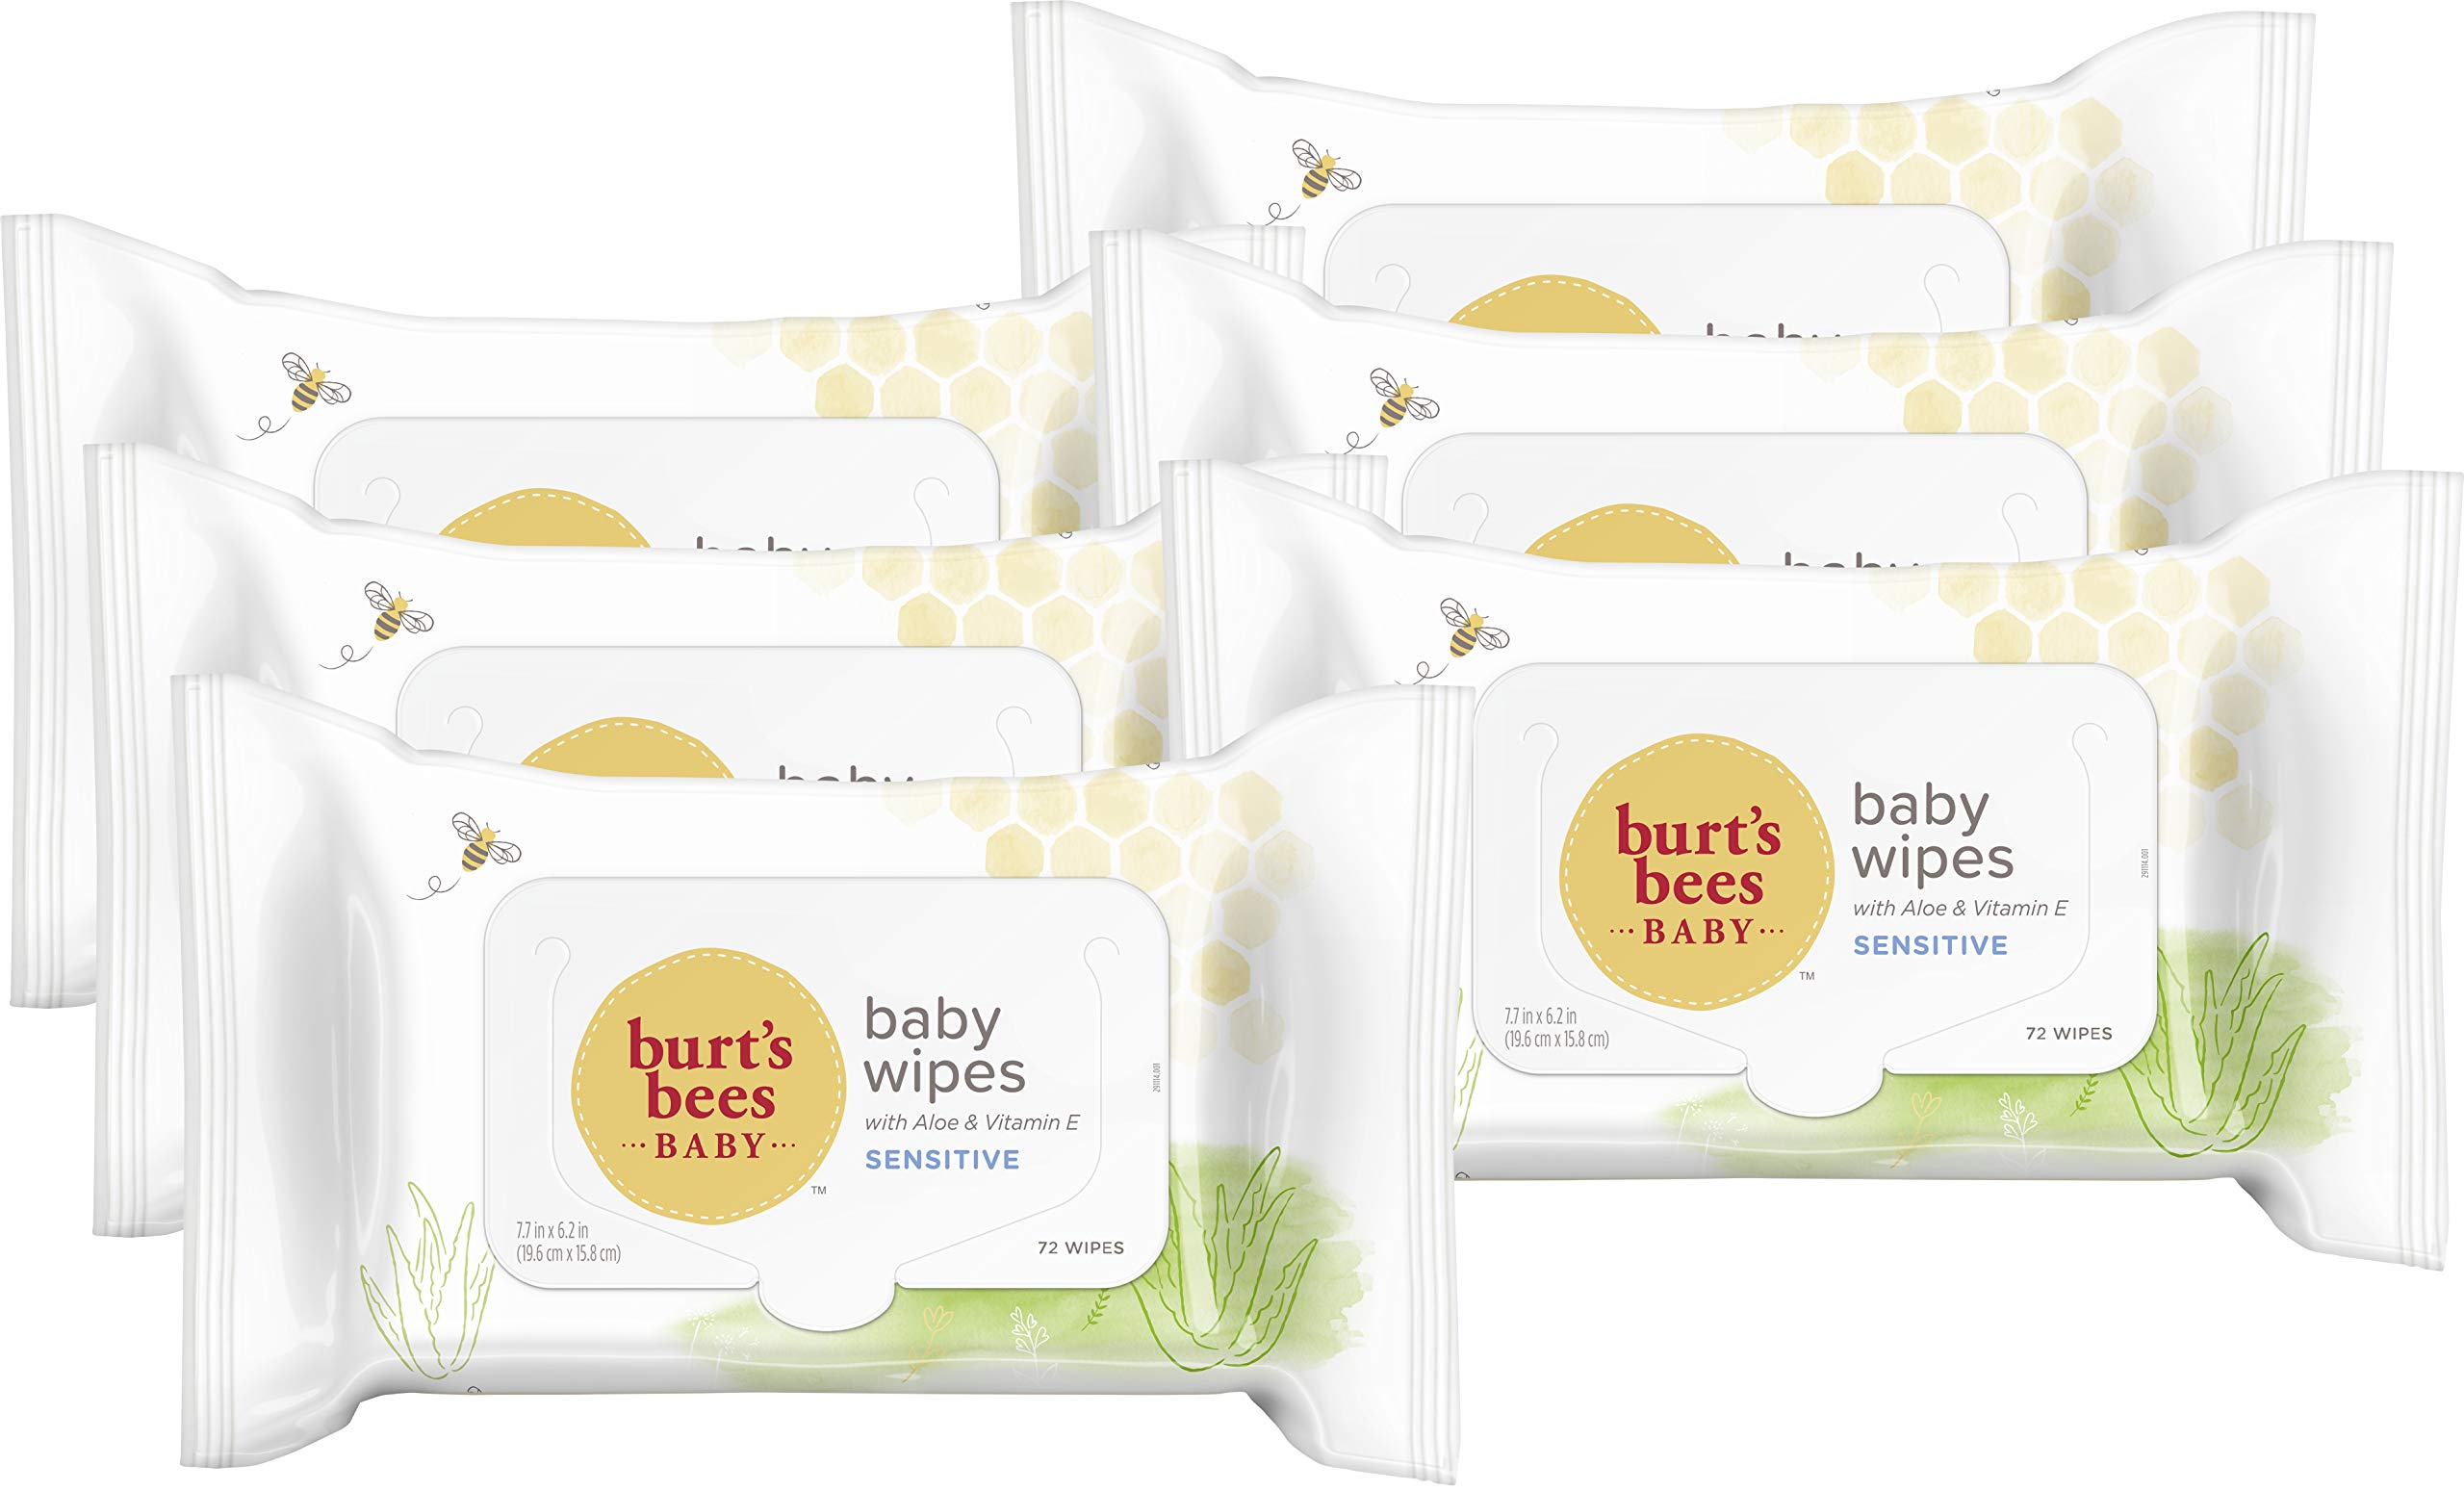 Burt's Bees Baby Wipes, Unscented Towelettes for Sensitive Skin, Hypoallergenic & Non-Irritating, All Natural with Soothing Aloe & Vitamin E, Fragrance Free, 6 Flip-Top Packs (432 Wipes Total)